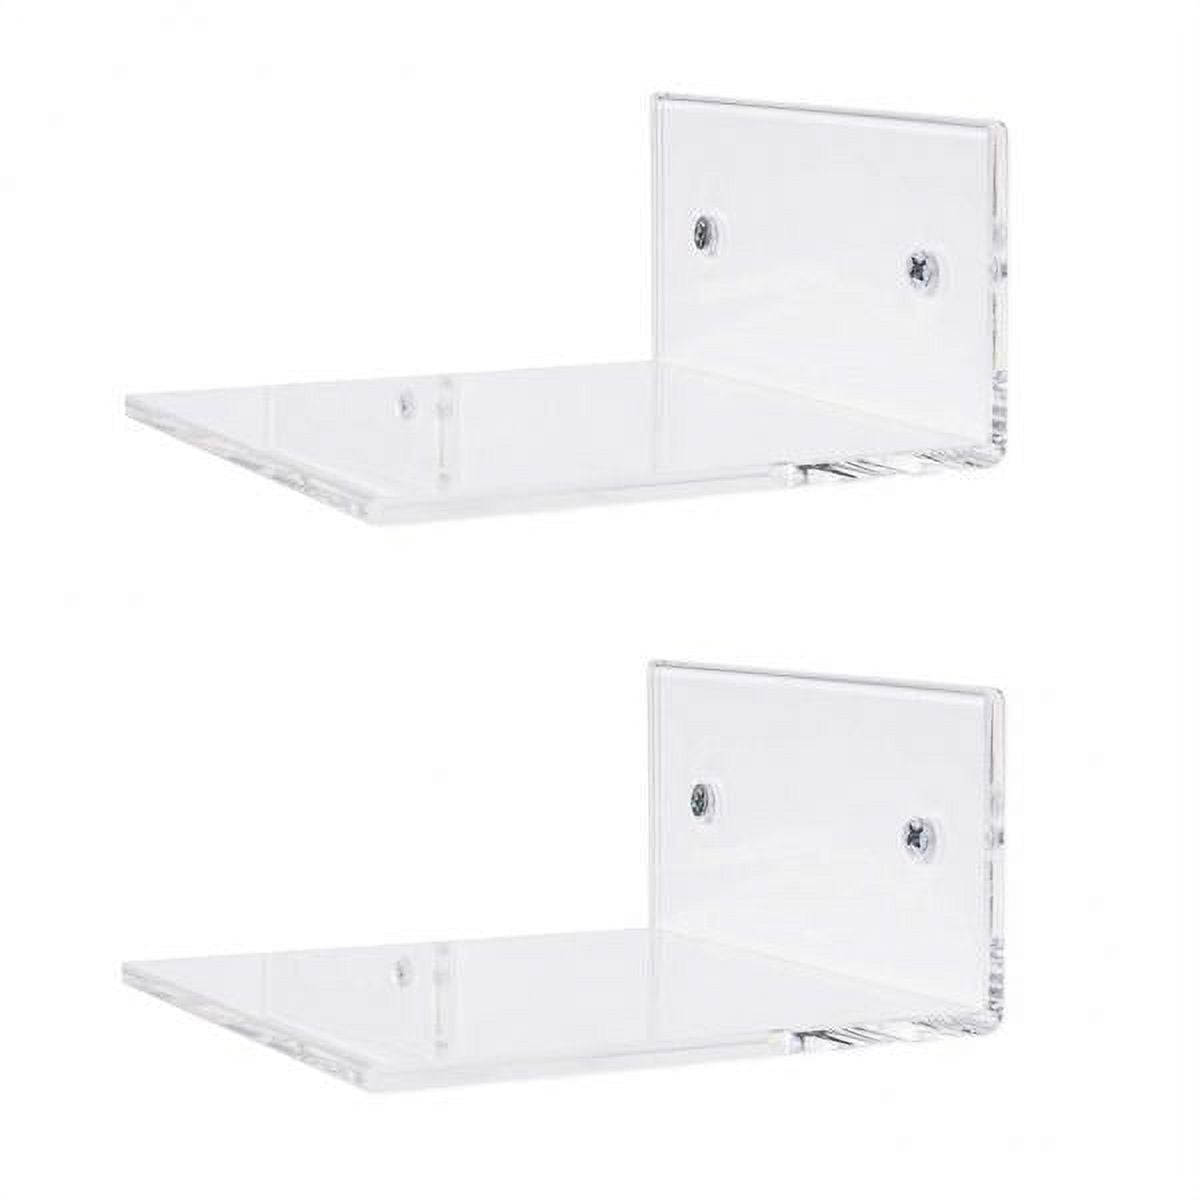 Clear Acrylic Wall Shelves,Small Floating Adhesive Shelf That Can Be  Installed in Bathroom, Living Room, Kitchen, Shower Room,Used to  Display,Organize